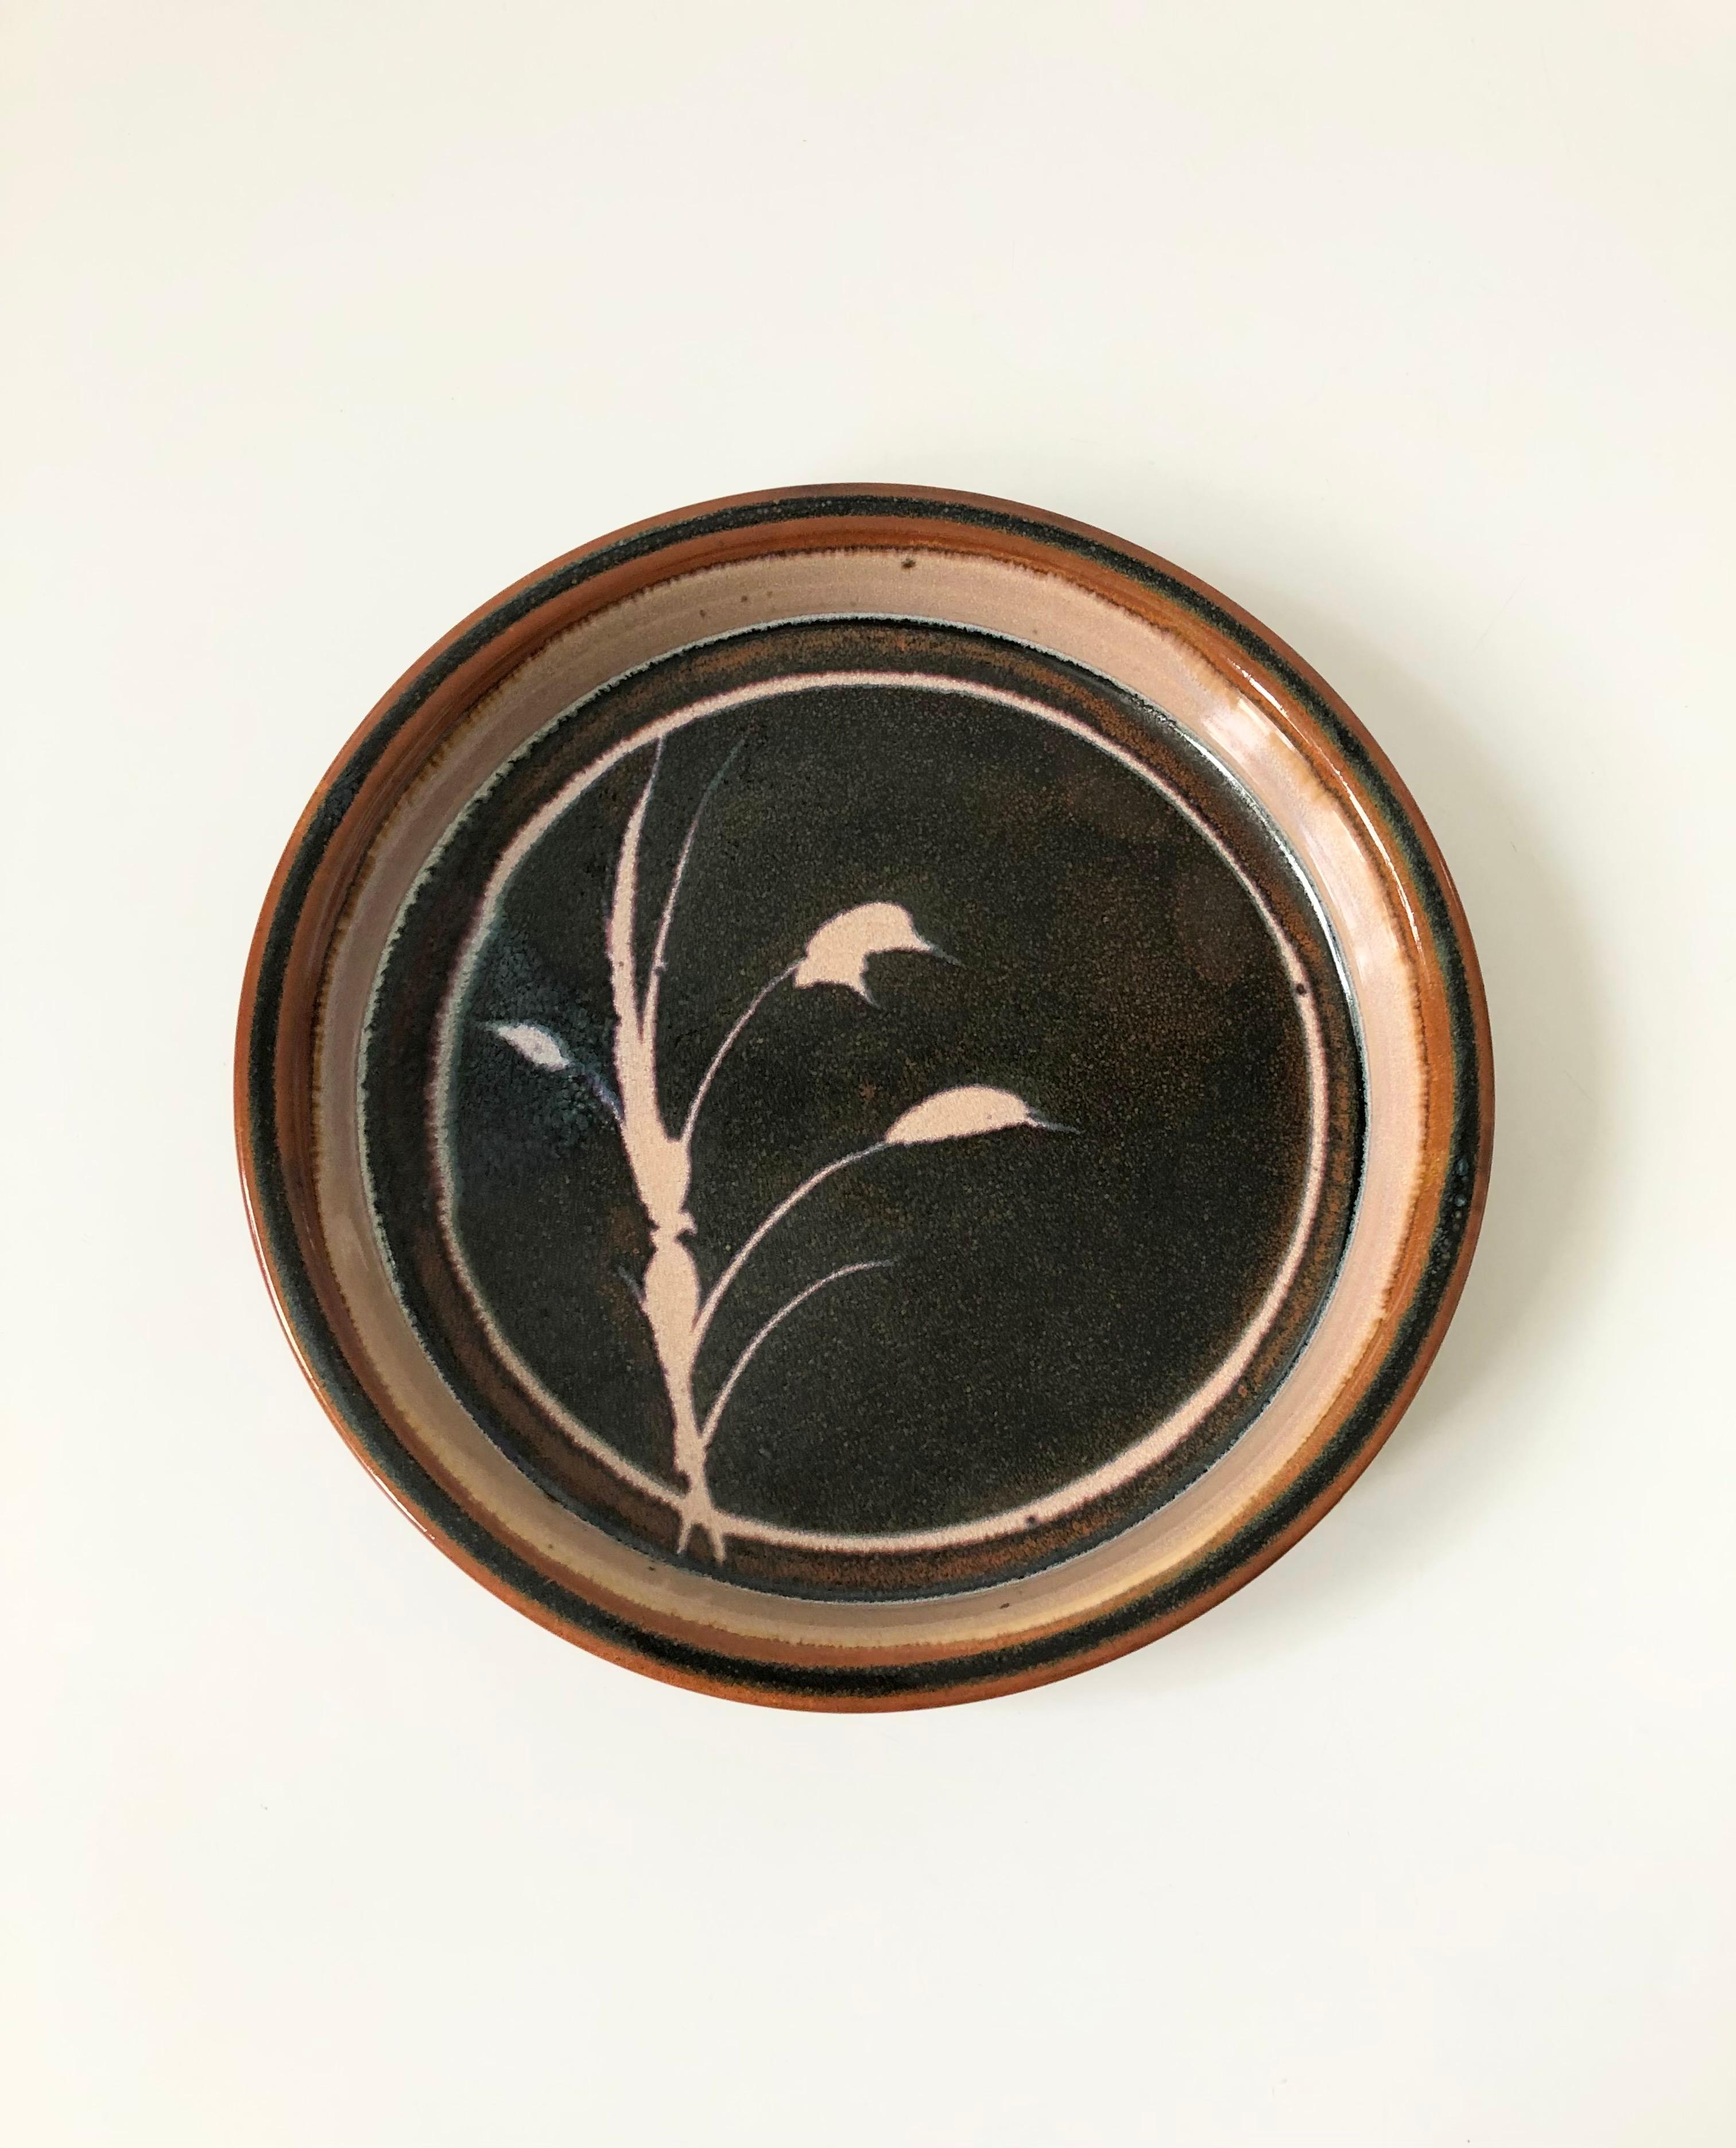 A vintage circular studio pottery tray. Nice large size, perfect for using as a serving dish or centerpiece. Features an offset handpainted wheat design in earthy muted purple and brown glazes. Signed on the base.
  